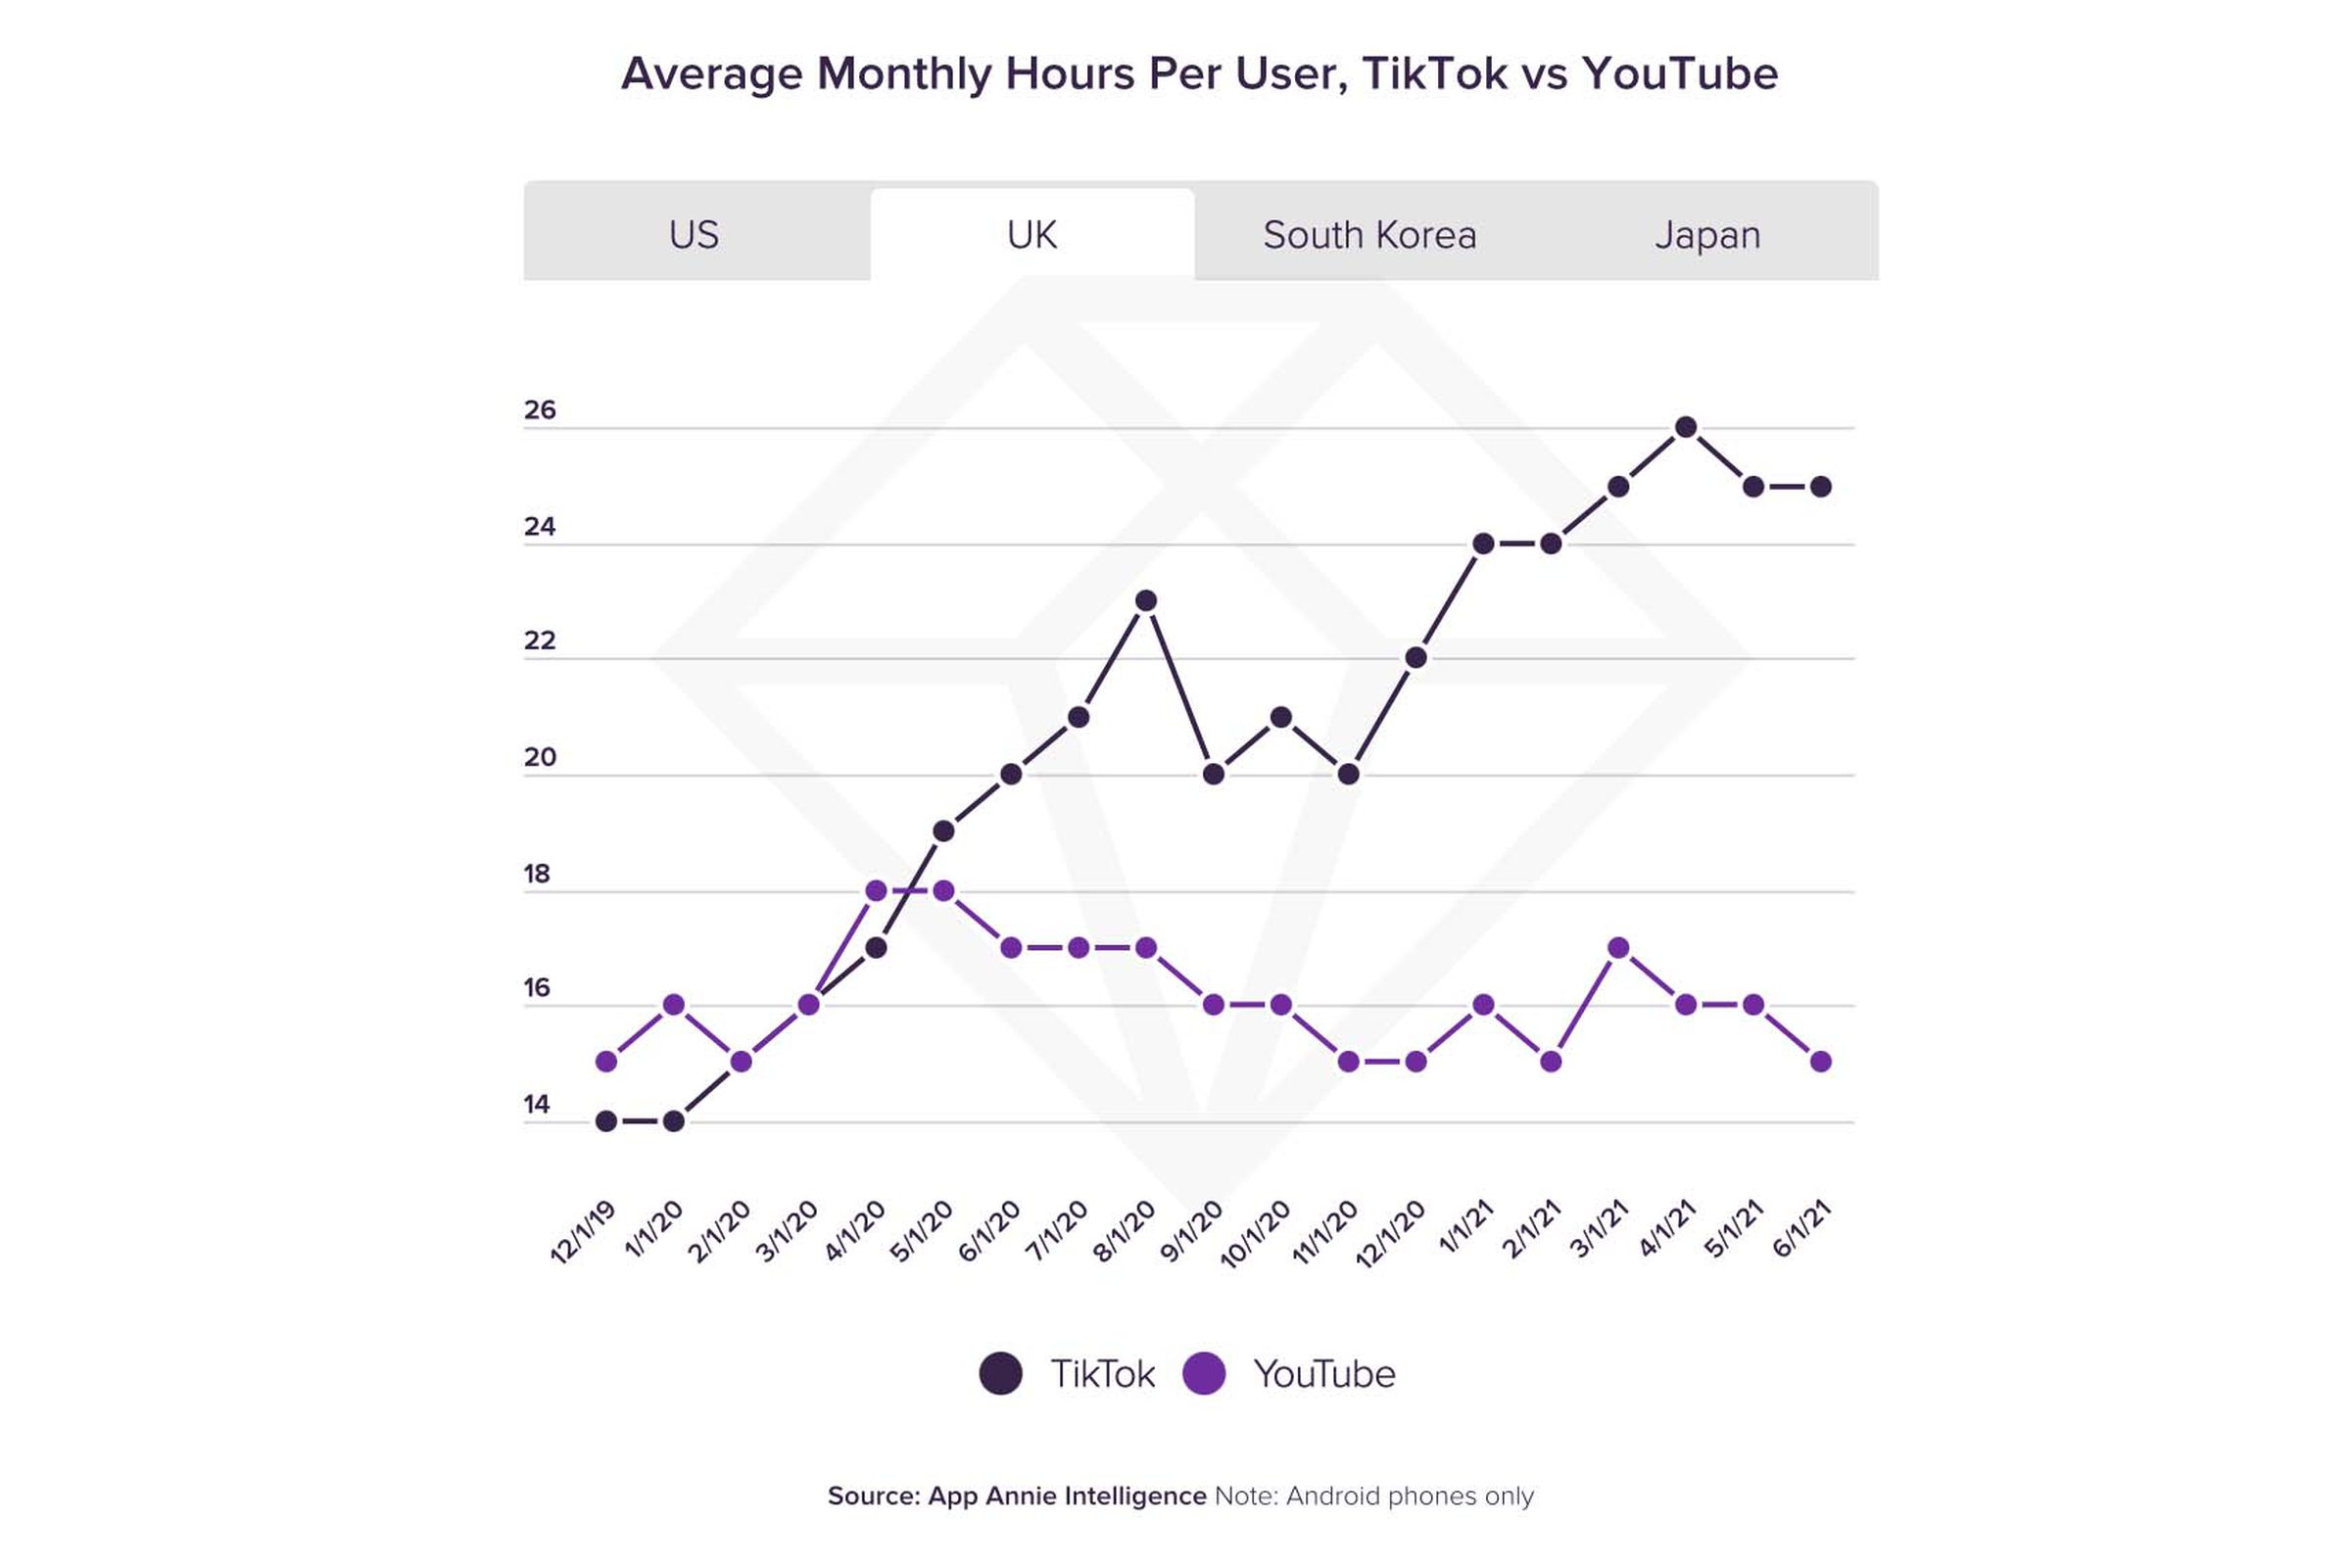 In the UK TikTok’s lead is even greater. 